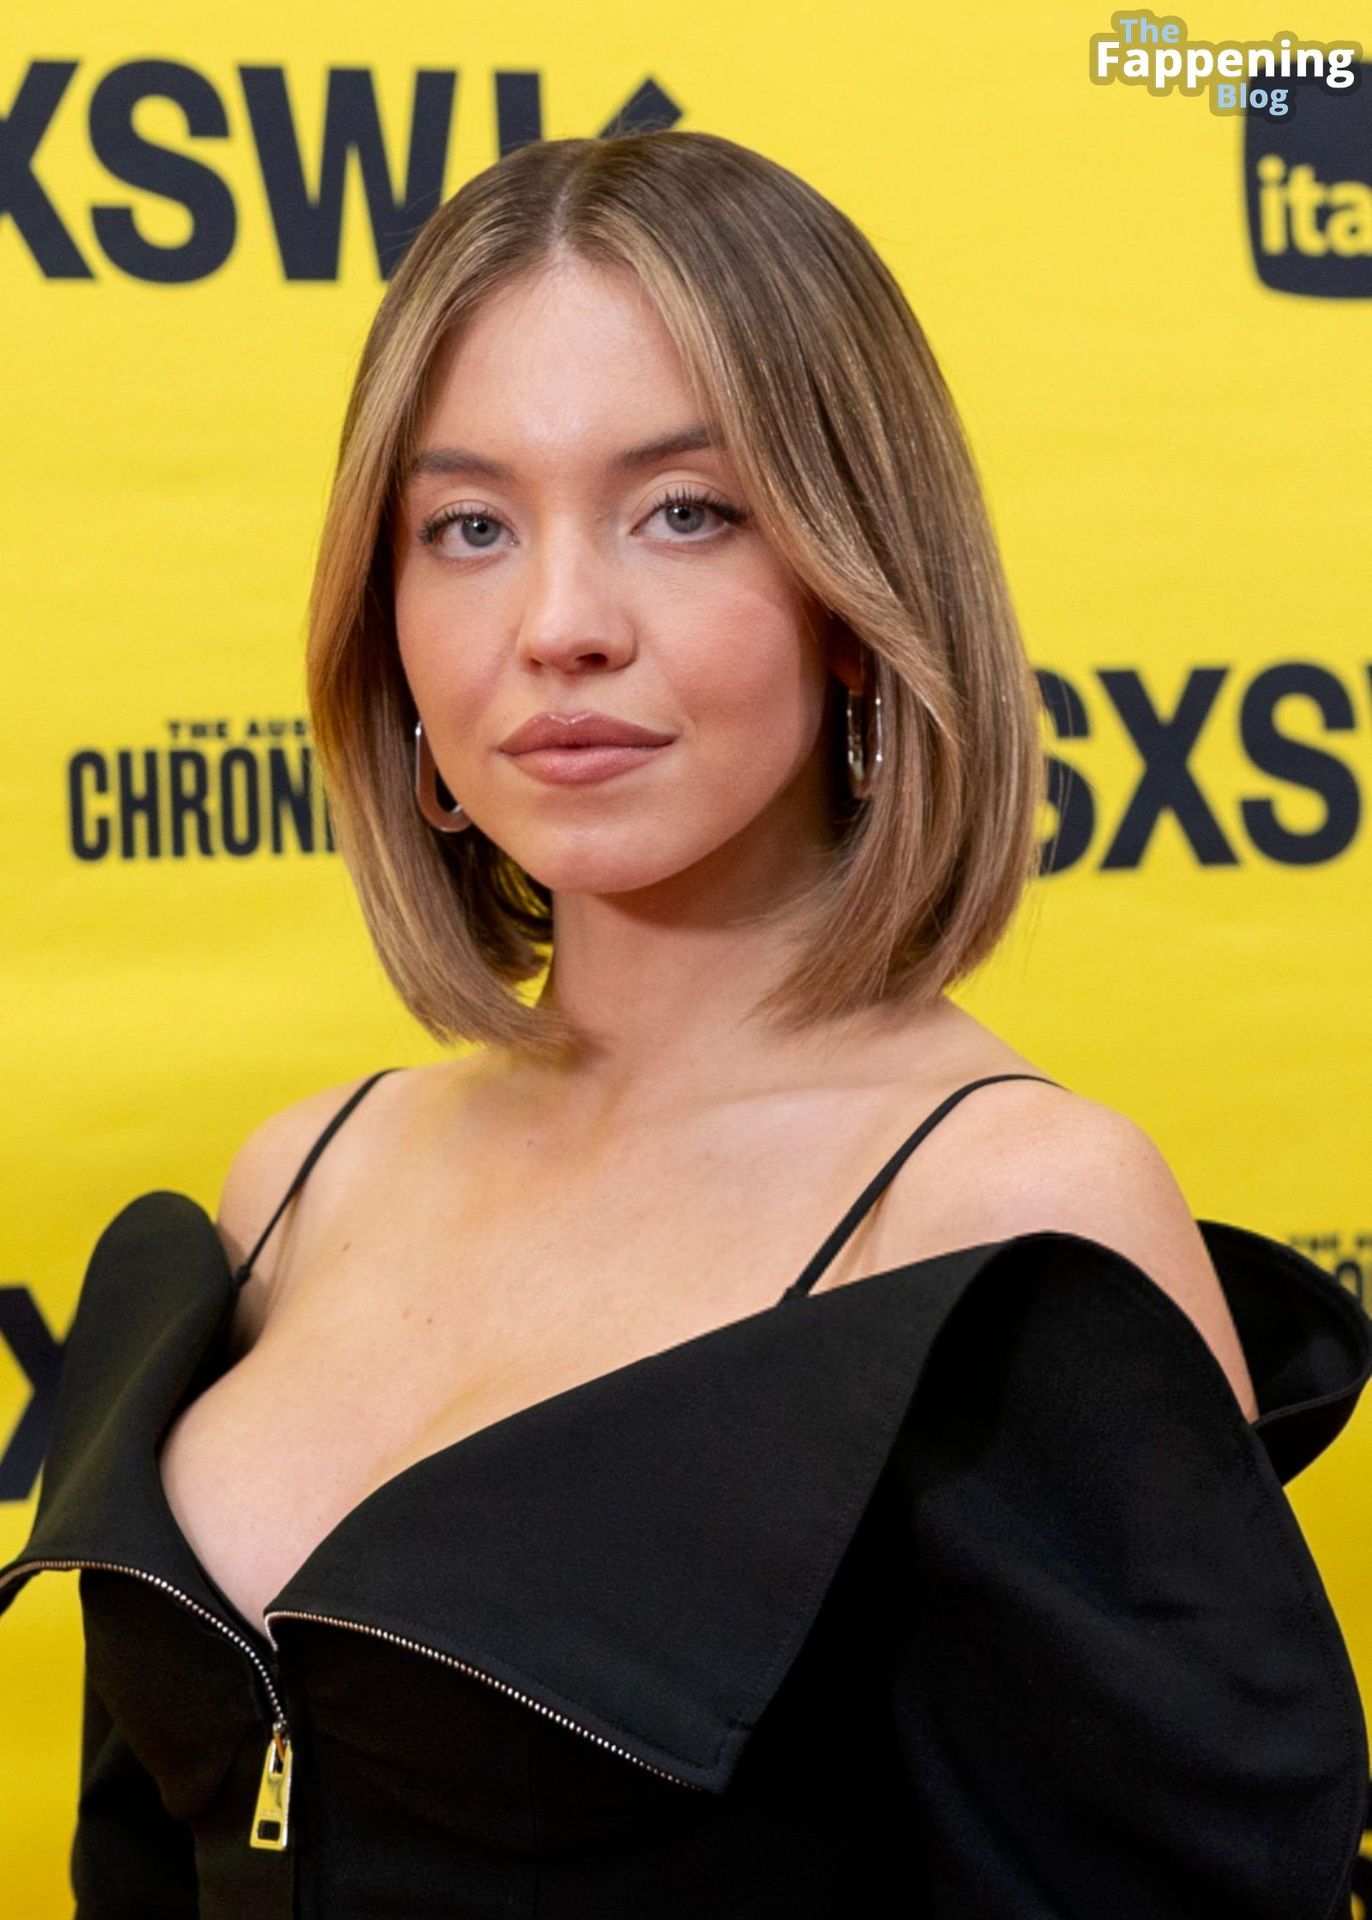 Sydney Sweeney Shows Off Her Sexy Big Boobs at SXSW (23 Photos)